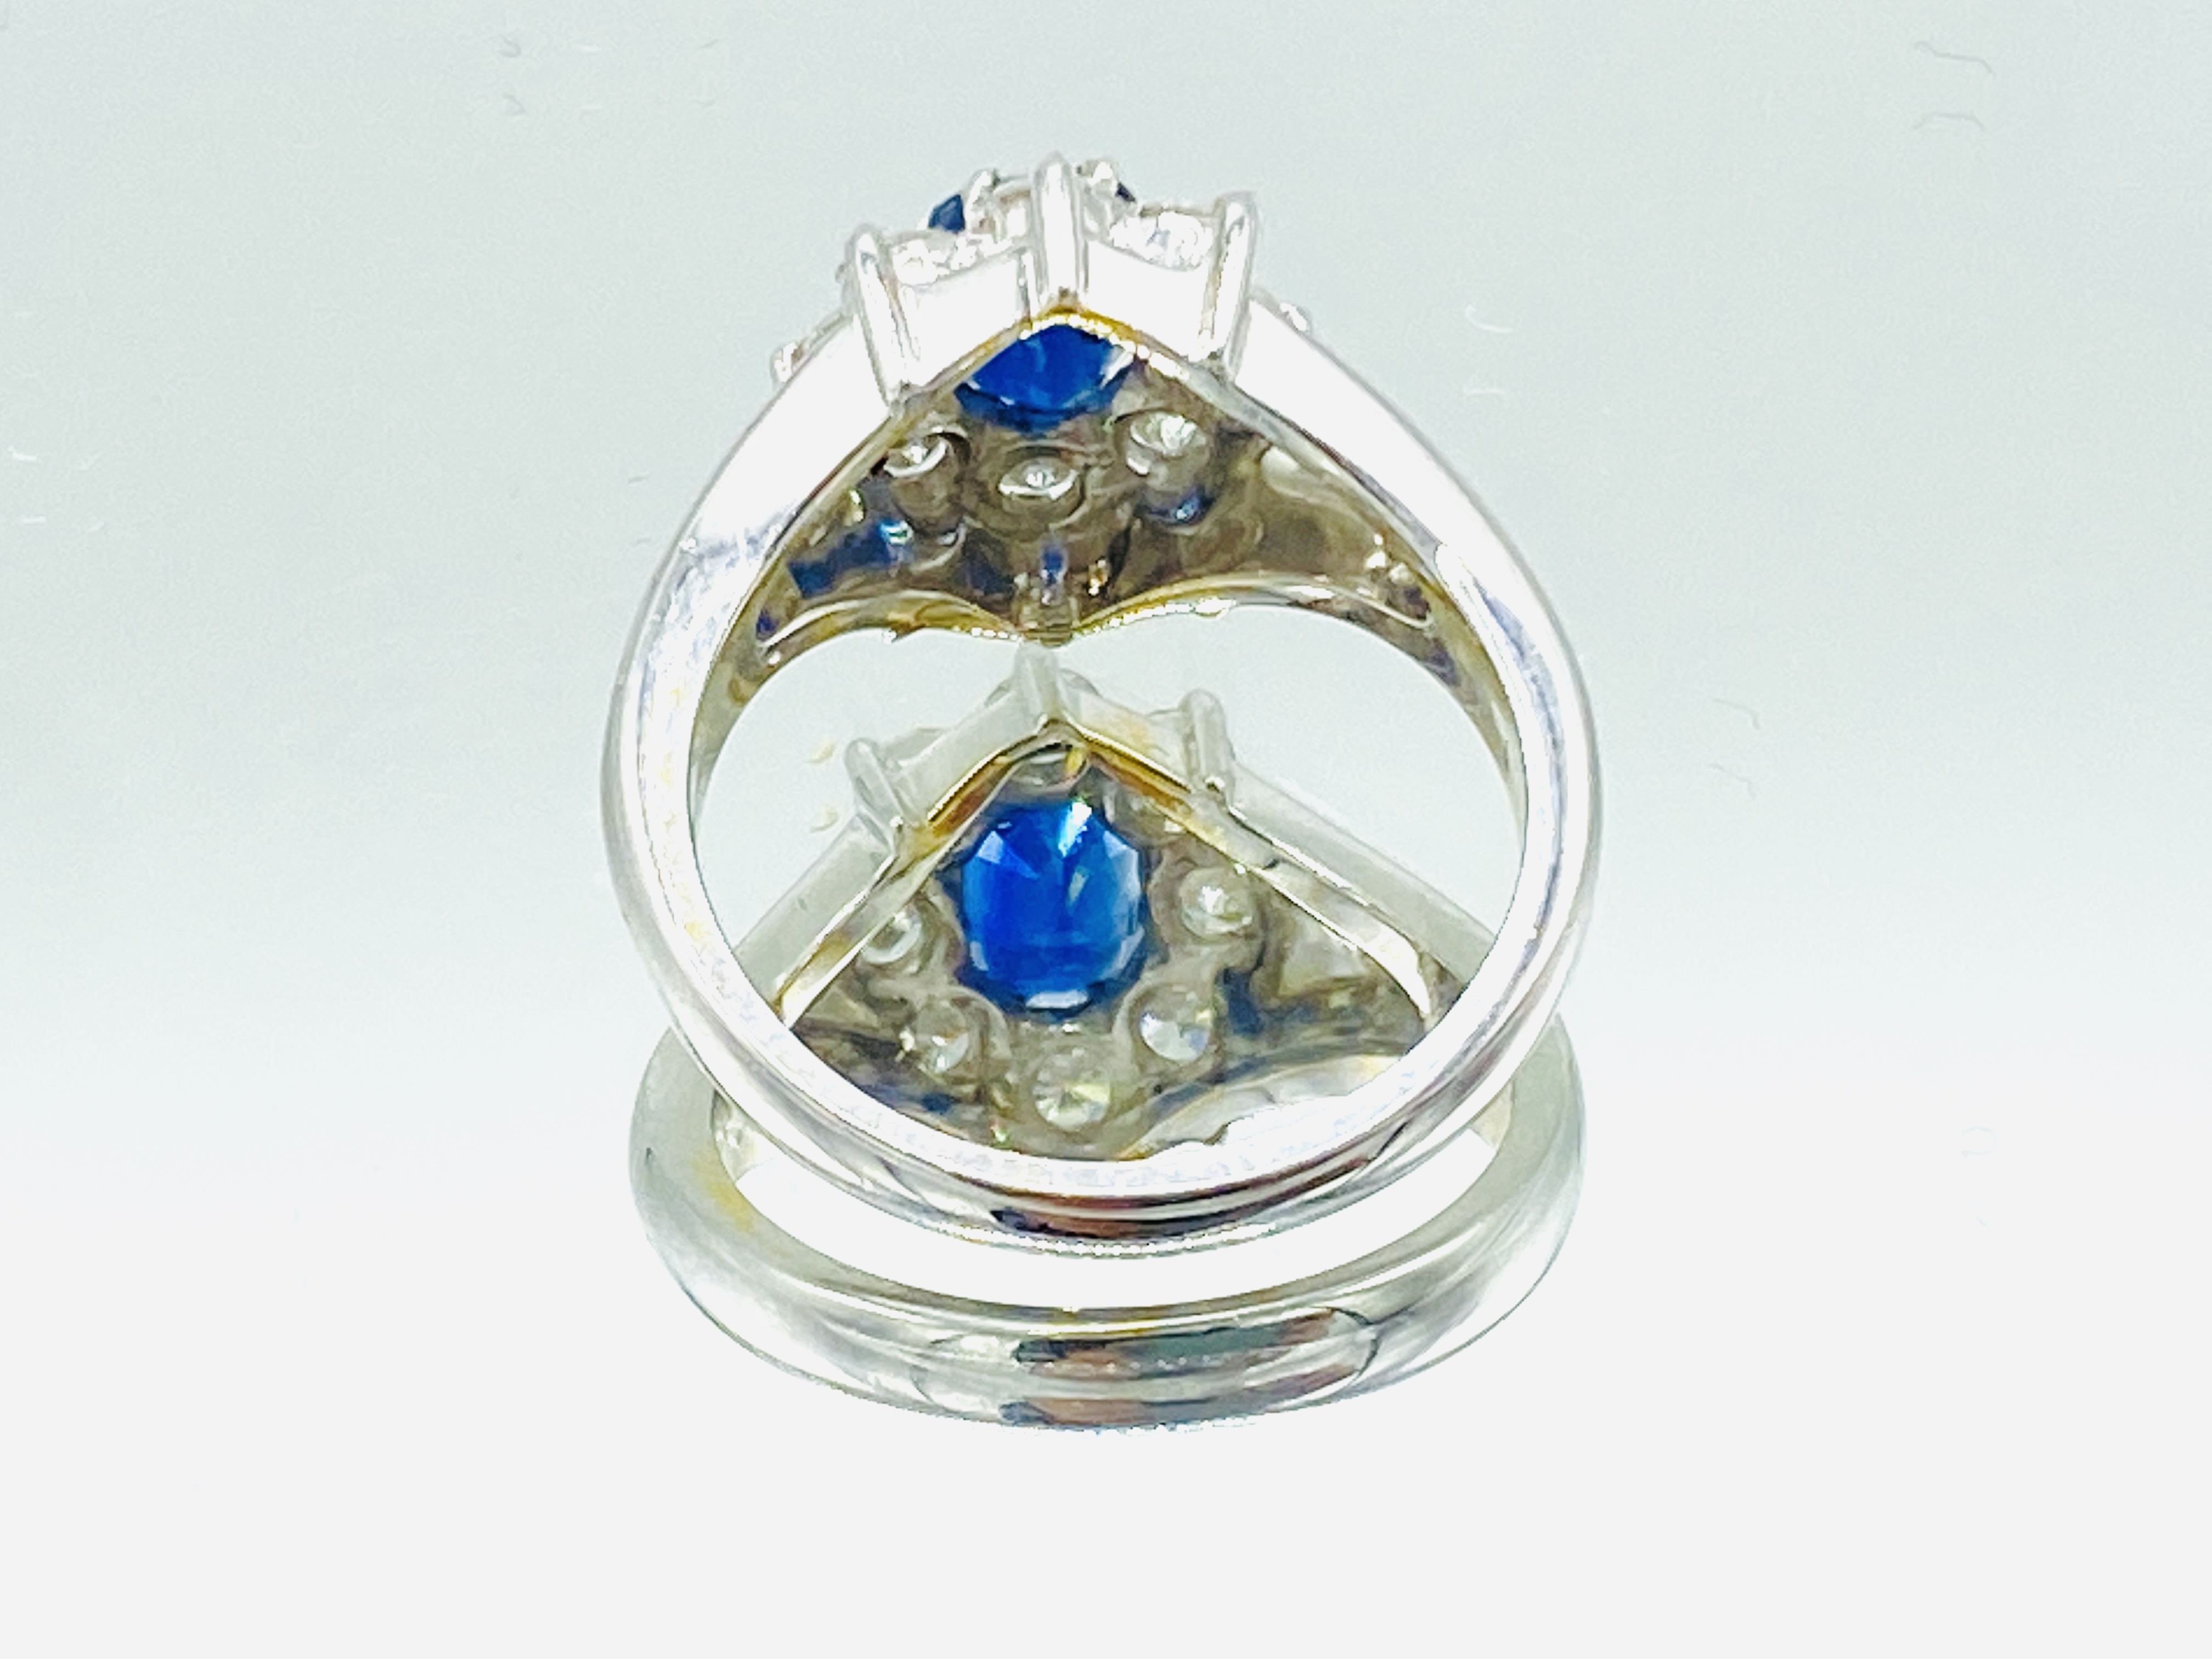 18ct gold, sapphire and diamond ring - Image 2 of 5